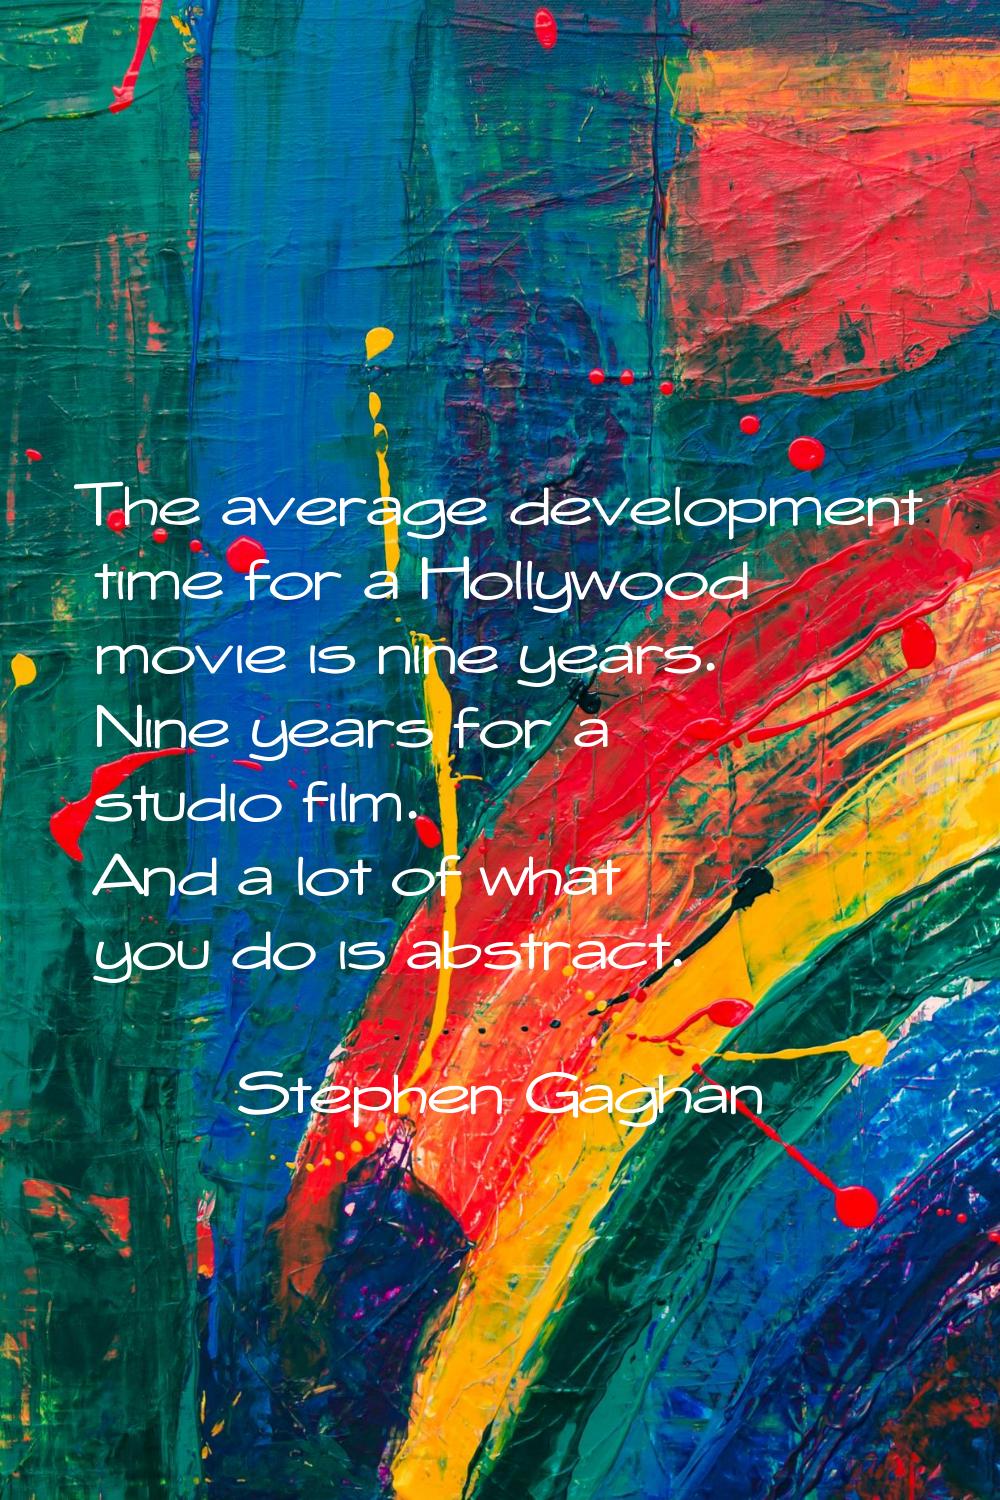 The average development time for a Hollywood movie is nine years. Nine years for a studio film. And